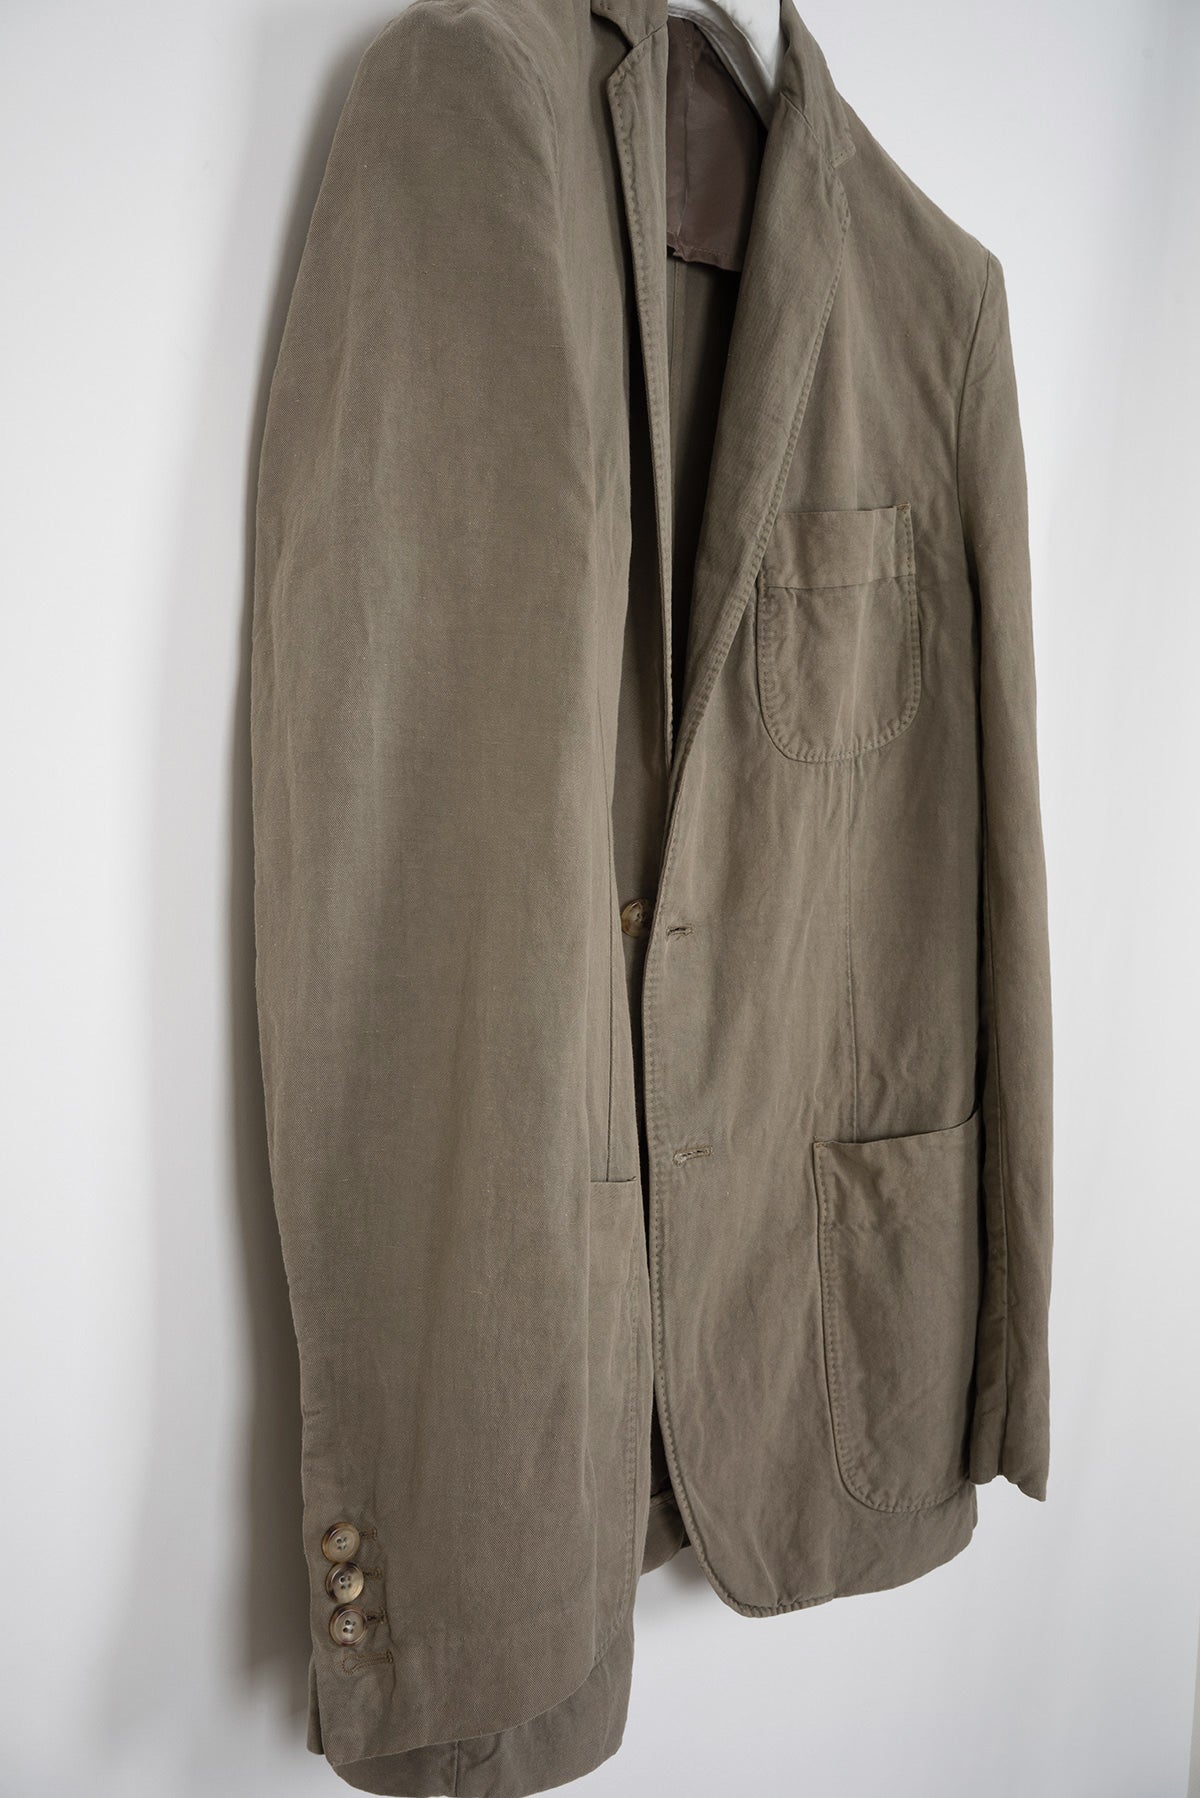 2004 S/S PATCH POCKET UNLINED RAYON/LINEN MILITARY GREEN BLAZER